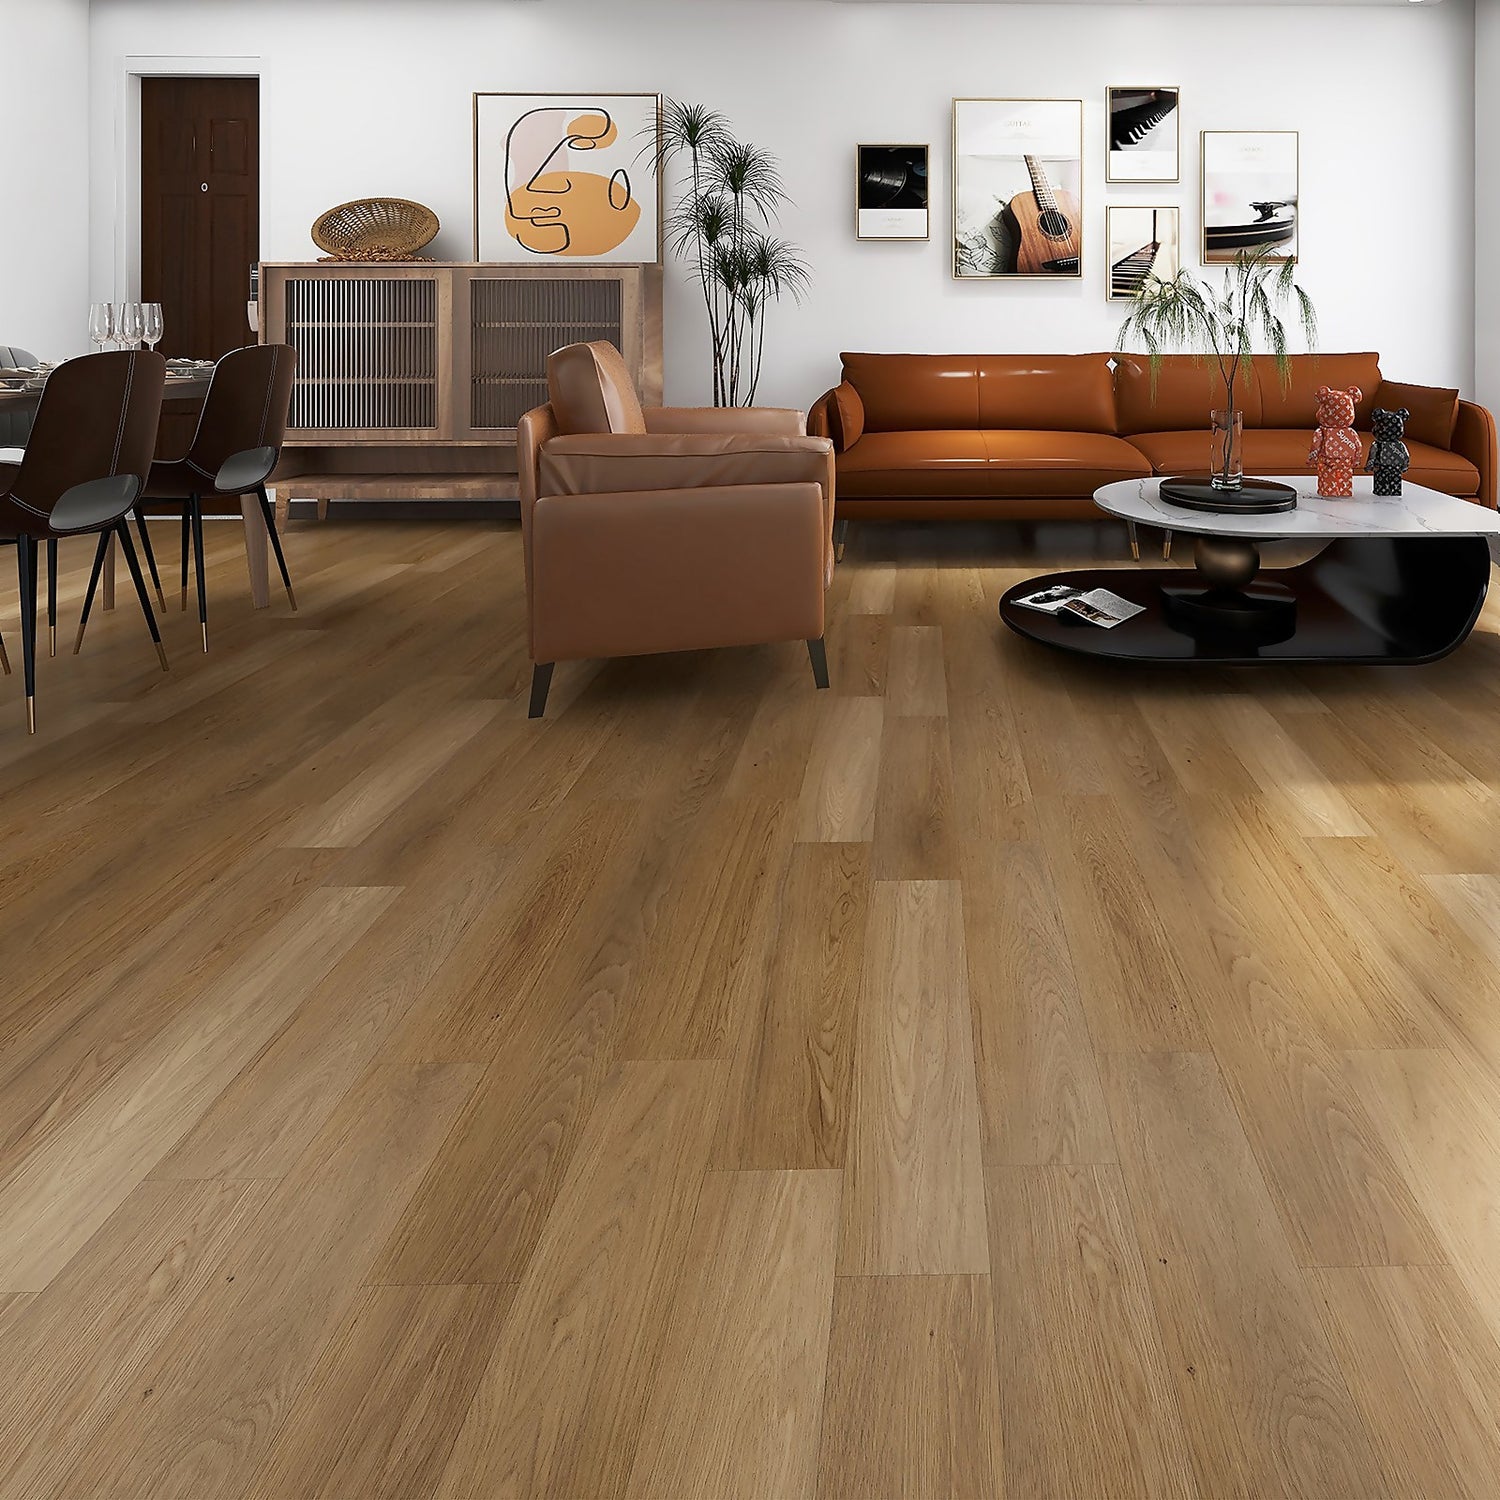 Sand Luxury Vinyl Plank Flooring - Natural and Durable Flooring Solutions